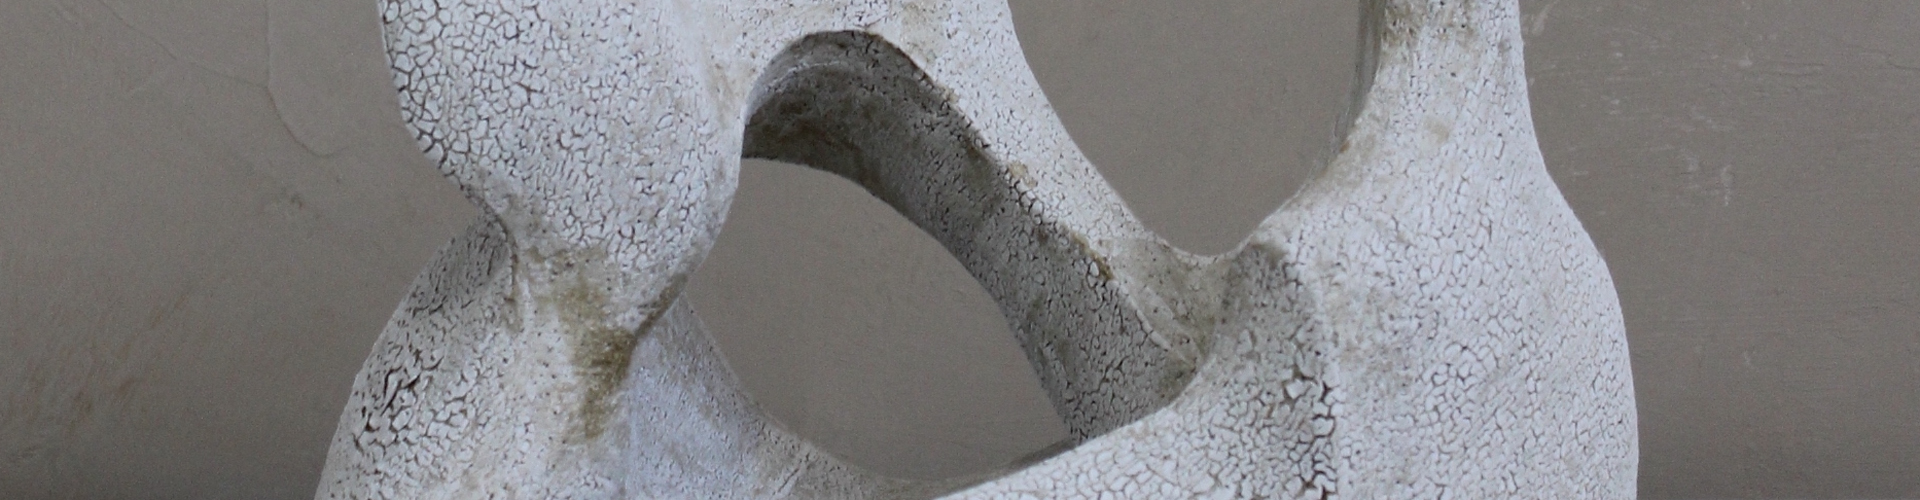 Emma Lindegaard, An Exchange Nonetheless, Stoneware sculpture, cropped